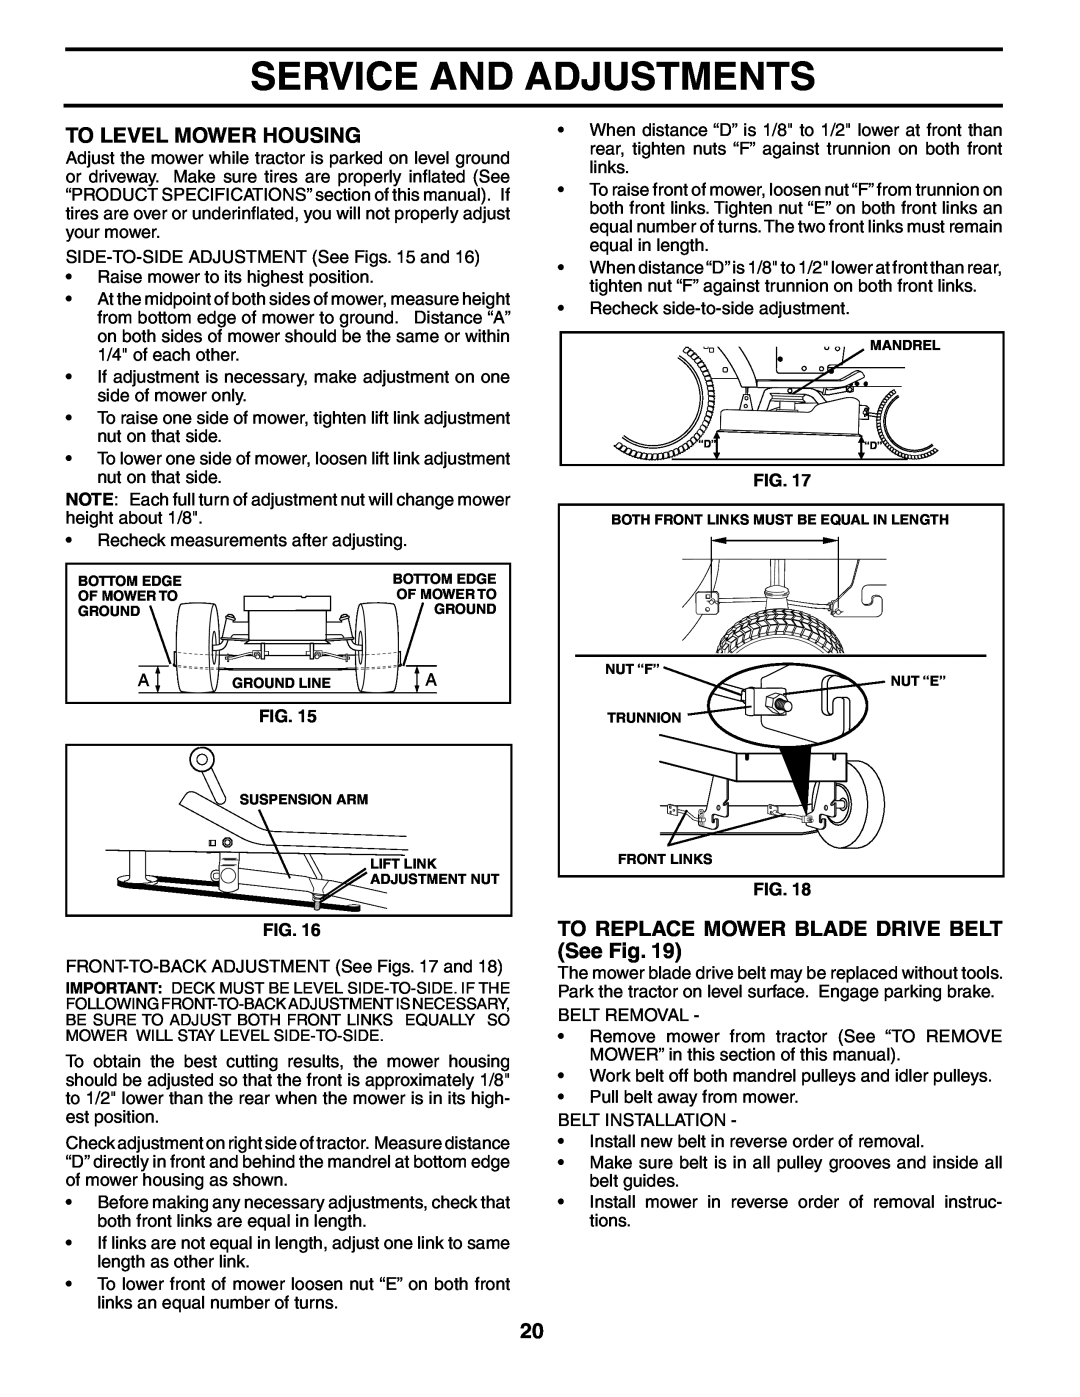 Poulan 194993 manual To Level Mower Housing, TO REPLACE MOWER BLADE DRIVE BELT See Fig, Service And Adjustments 